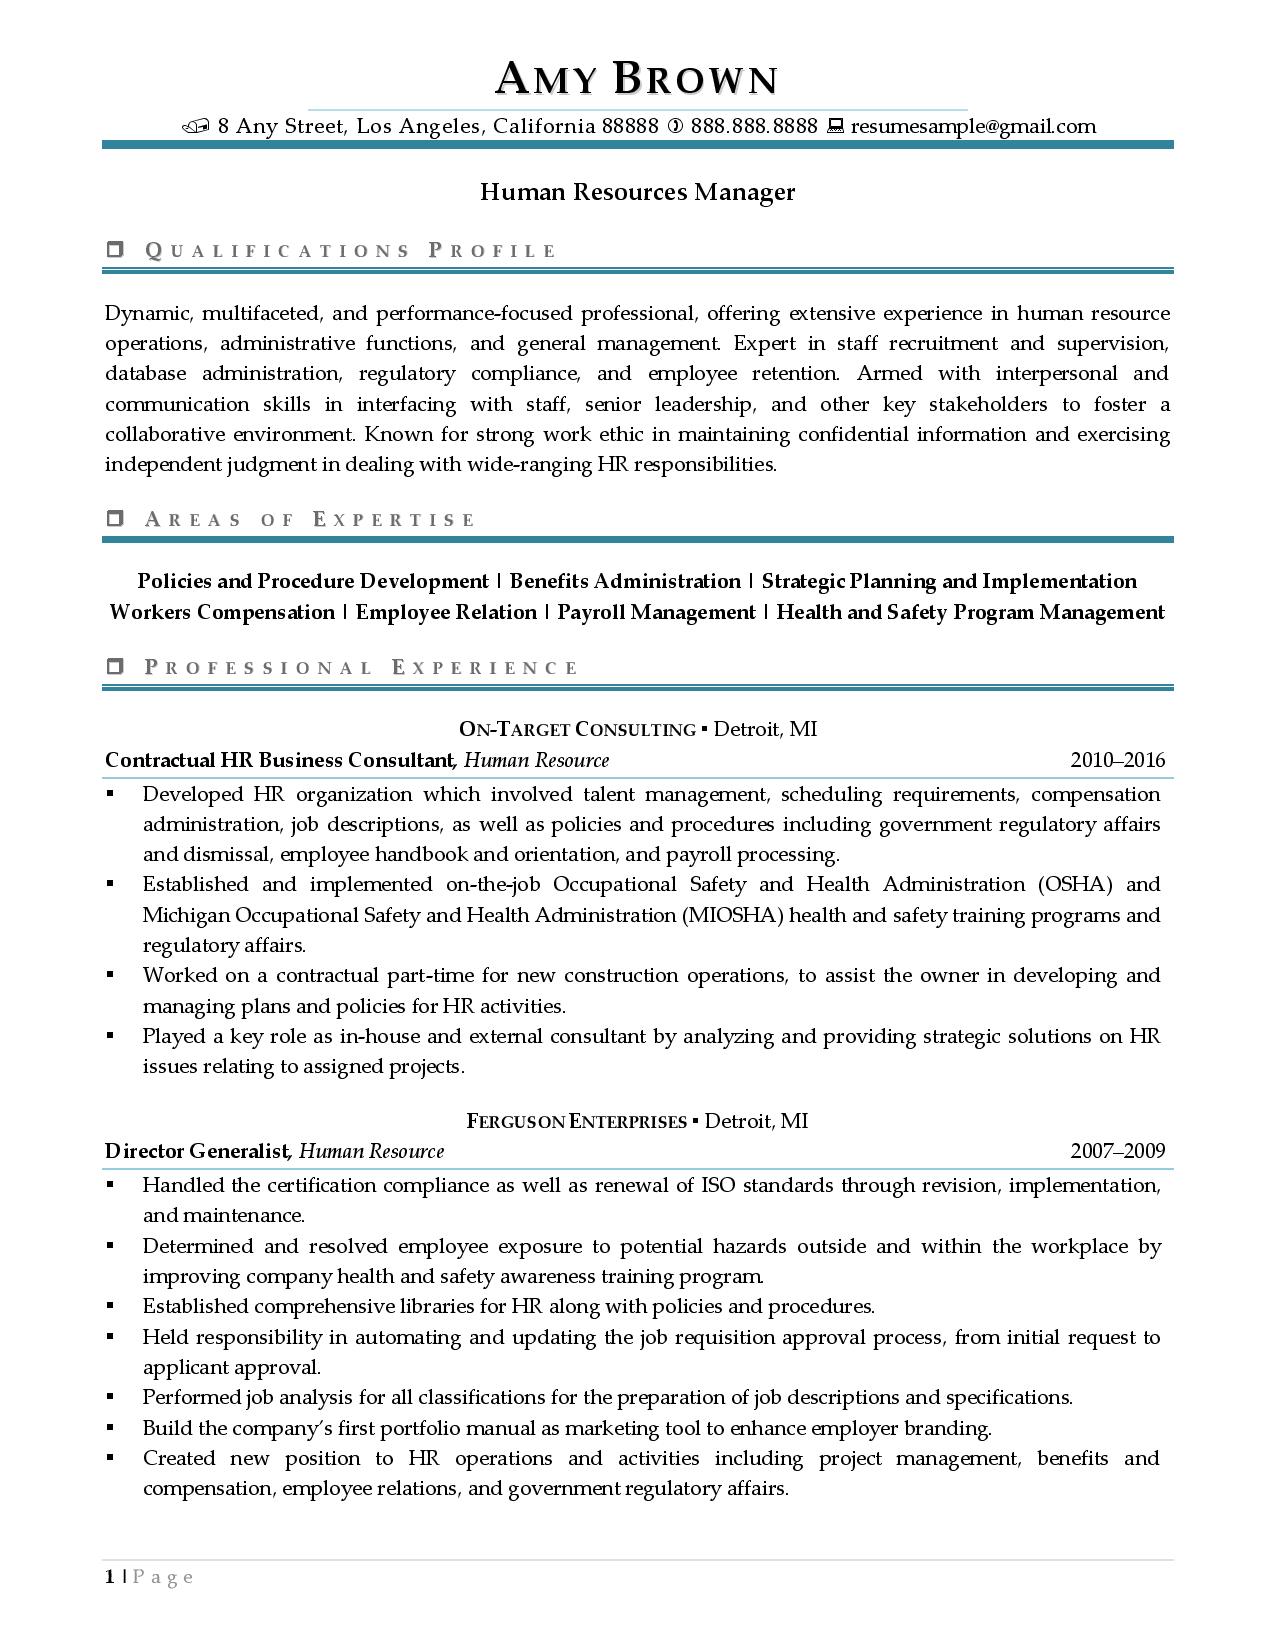 Human Resources Manager Resume Example Best Resume Templates